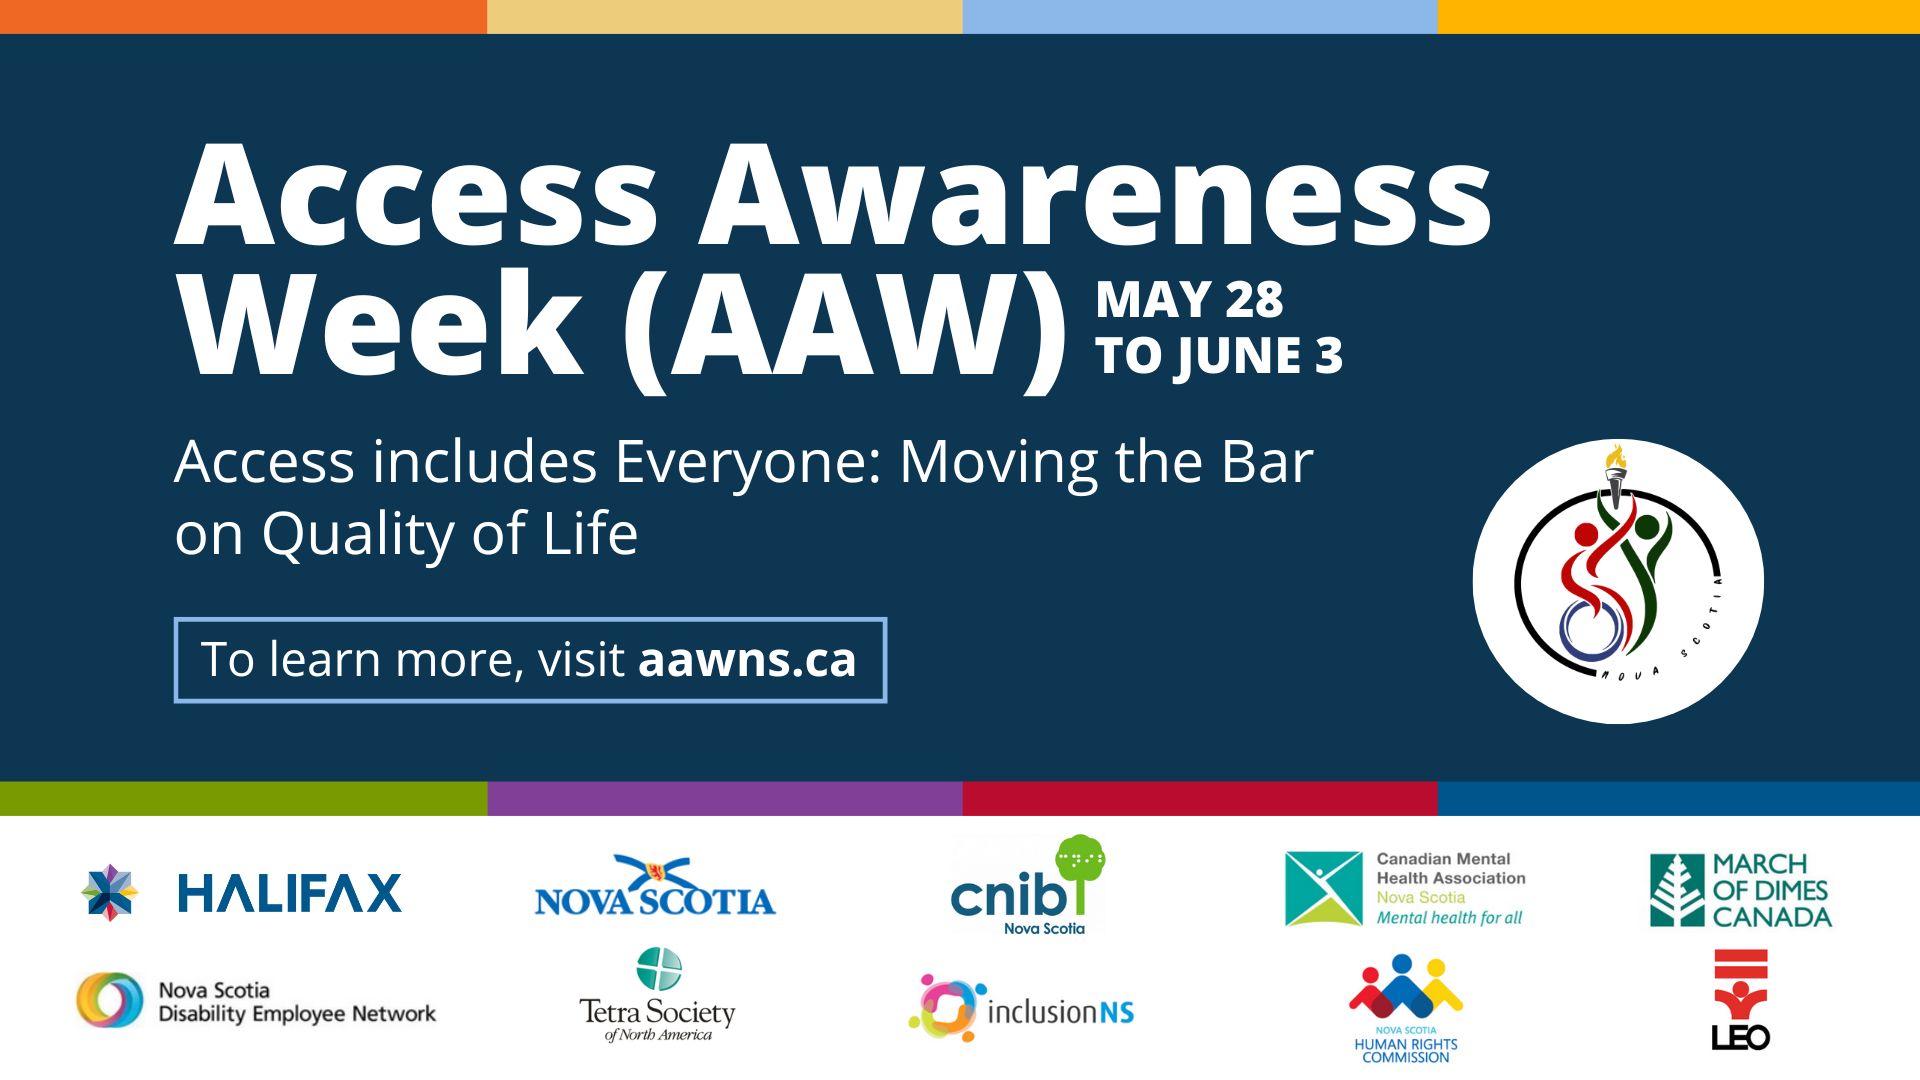 Poster style image with text: Access Awareness Week (AAW) May 28 - June 3 Reflection and Renewal - 35 Years of Access Awareness: The Promise of Progress. Supporting organization logos along the bottom.